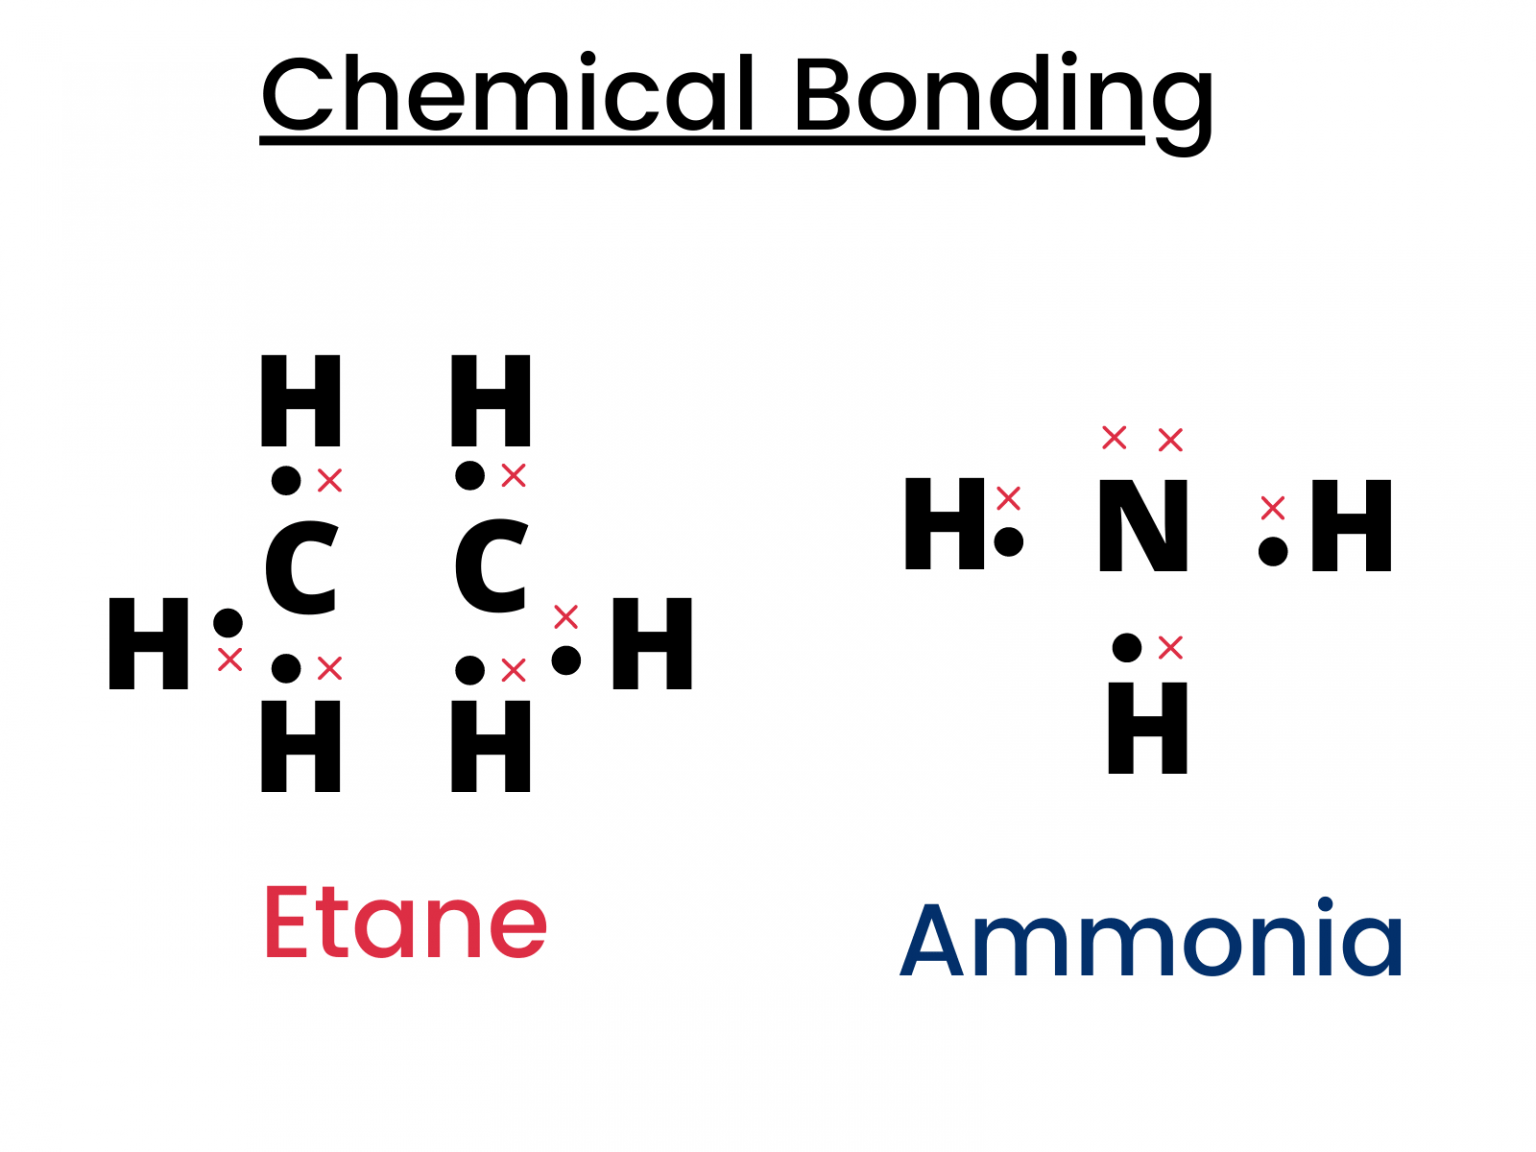 Chemical Bonding | GCE O Level Chemistry (5070) | Questions and Notes